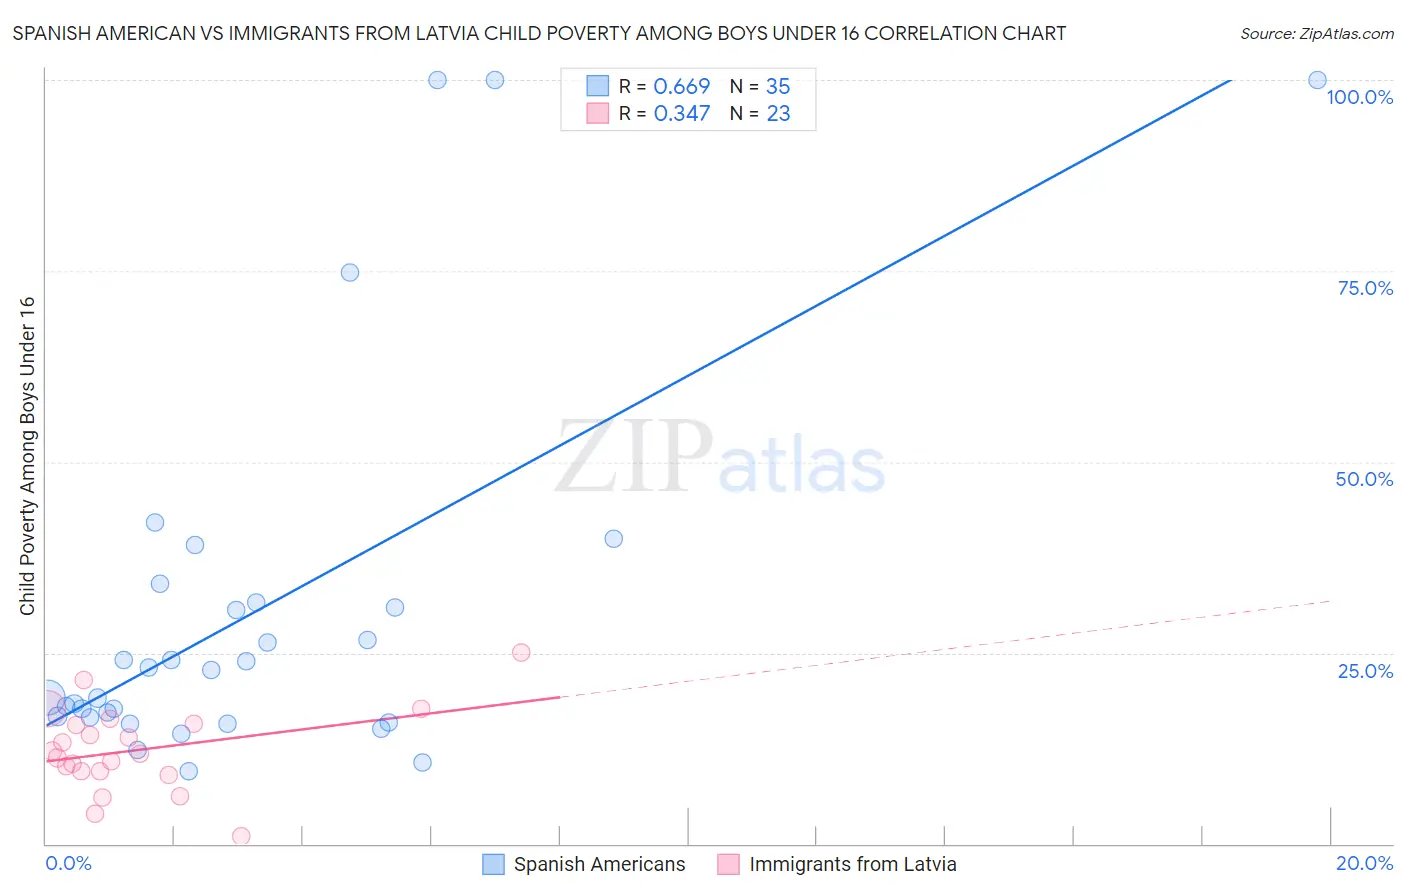 Spanish American vs Immigrants from Latvia Child Poverty Among Boys Under 16